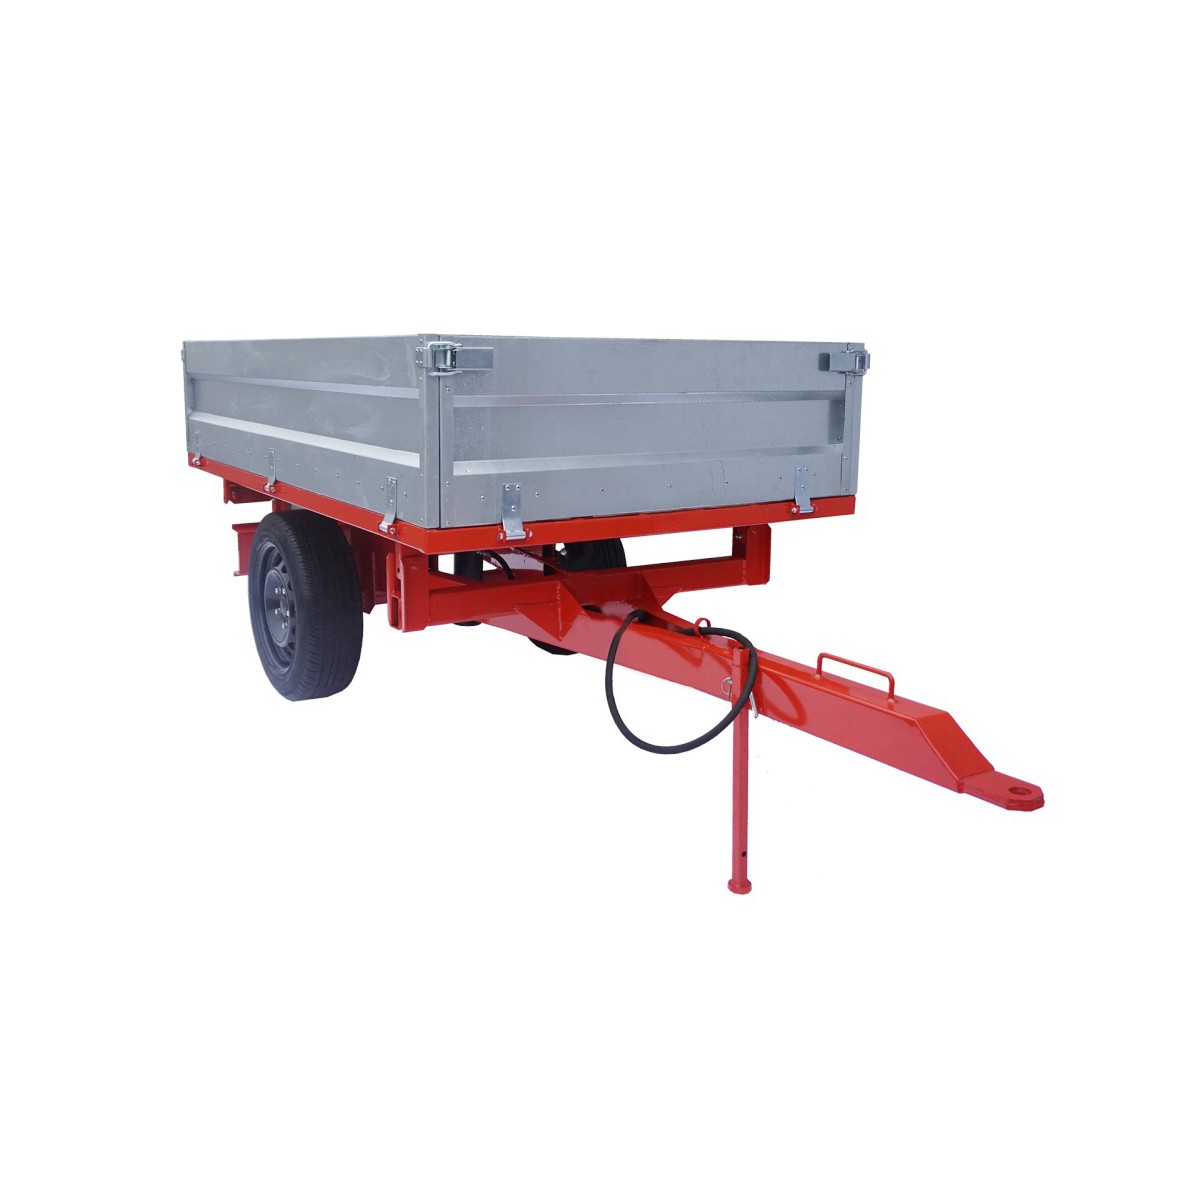 Single-axle agricultural trailer (125 x 205 cm) with Geograss tipper